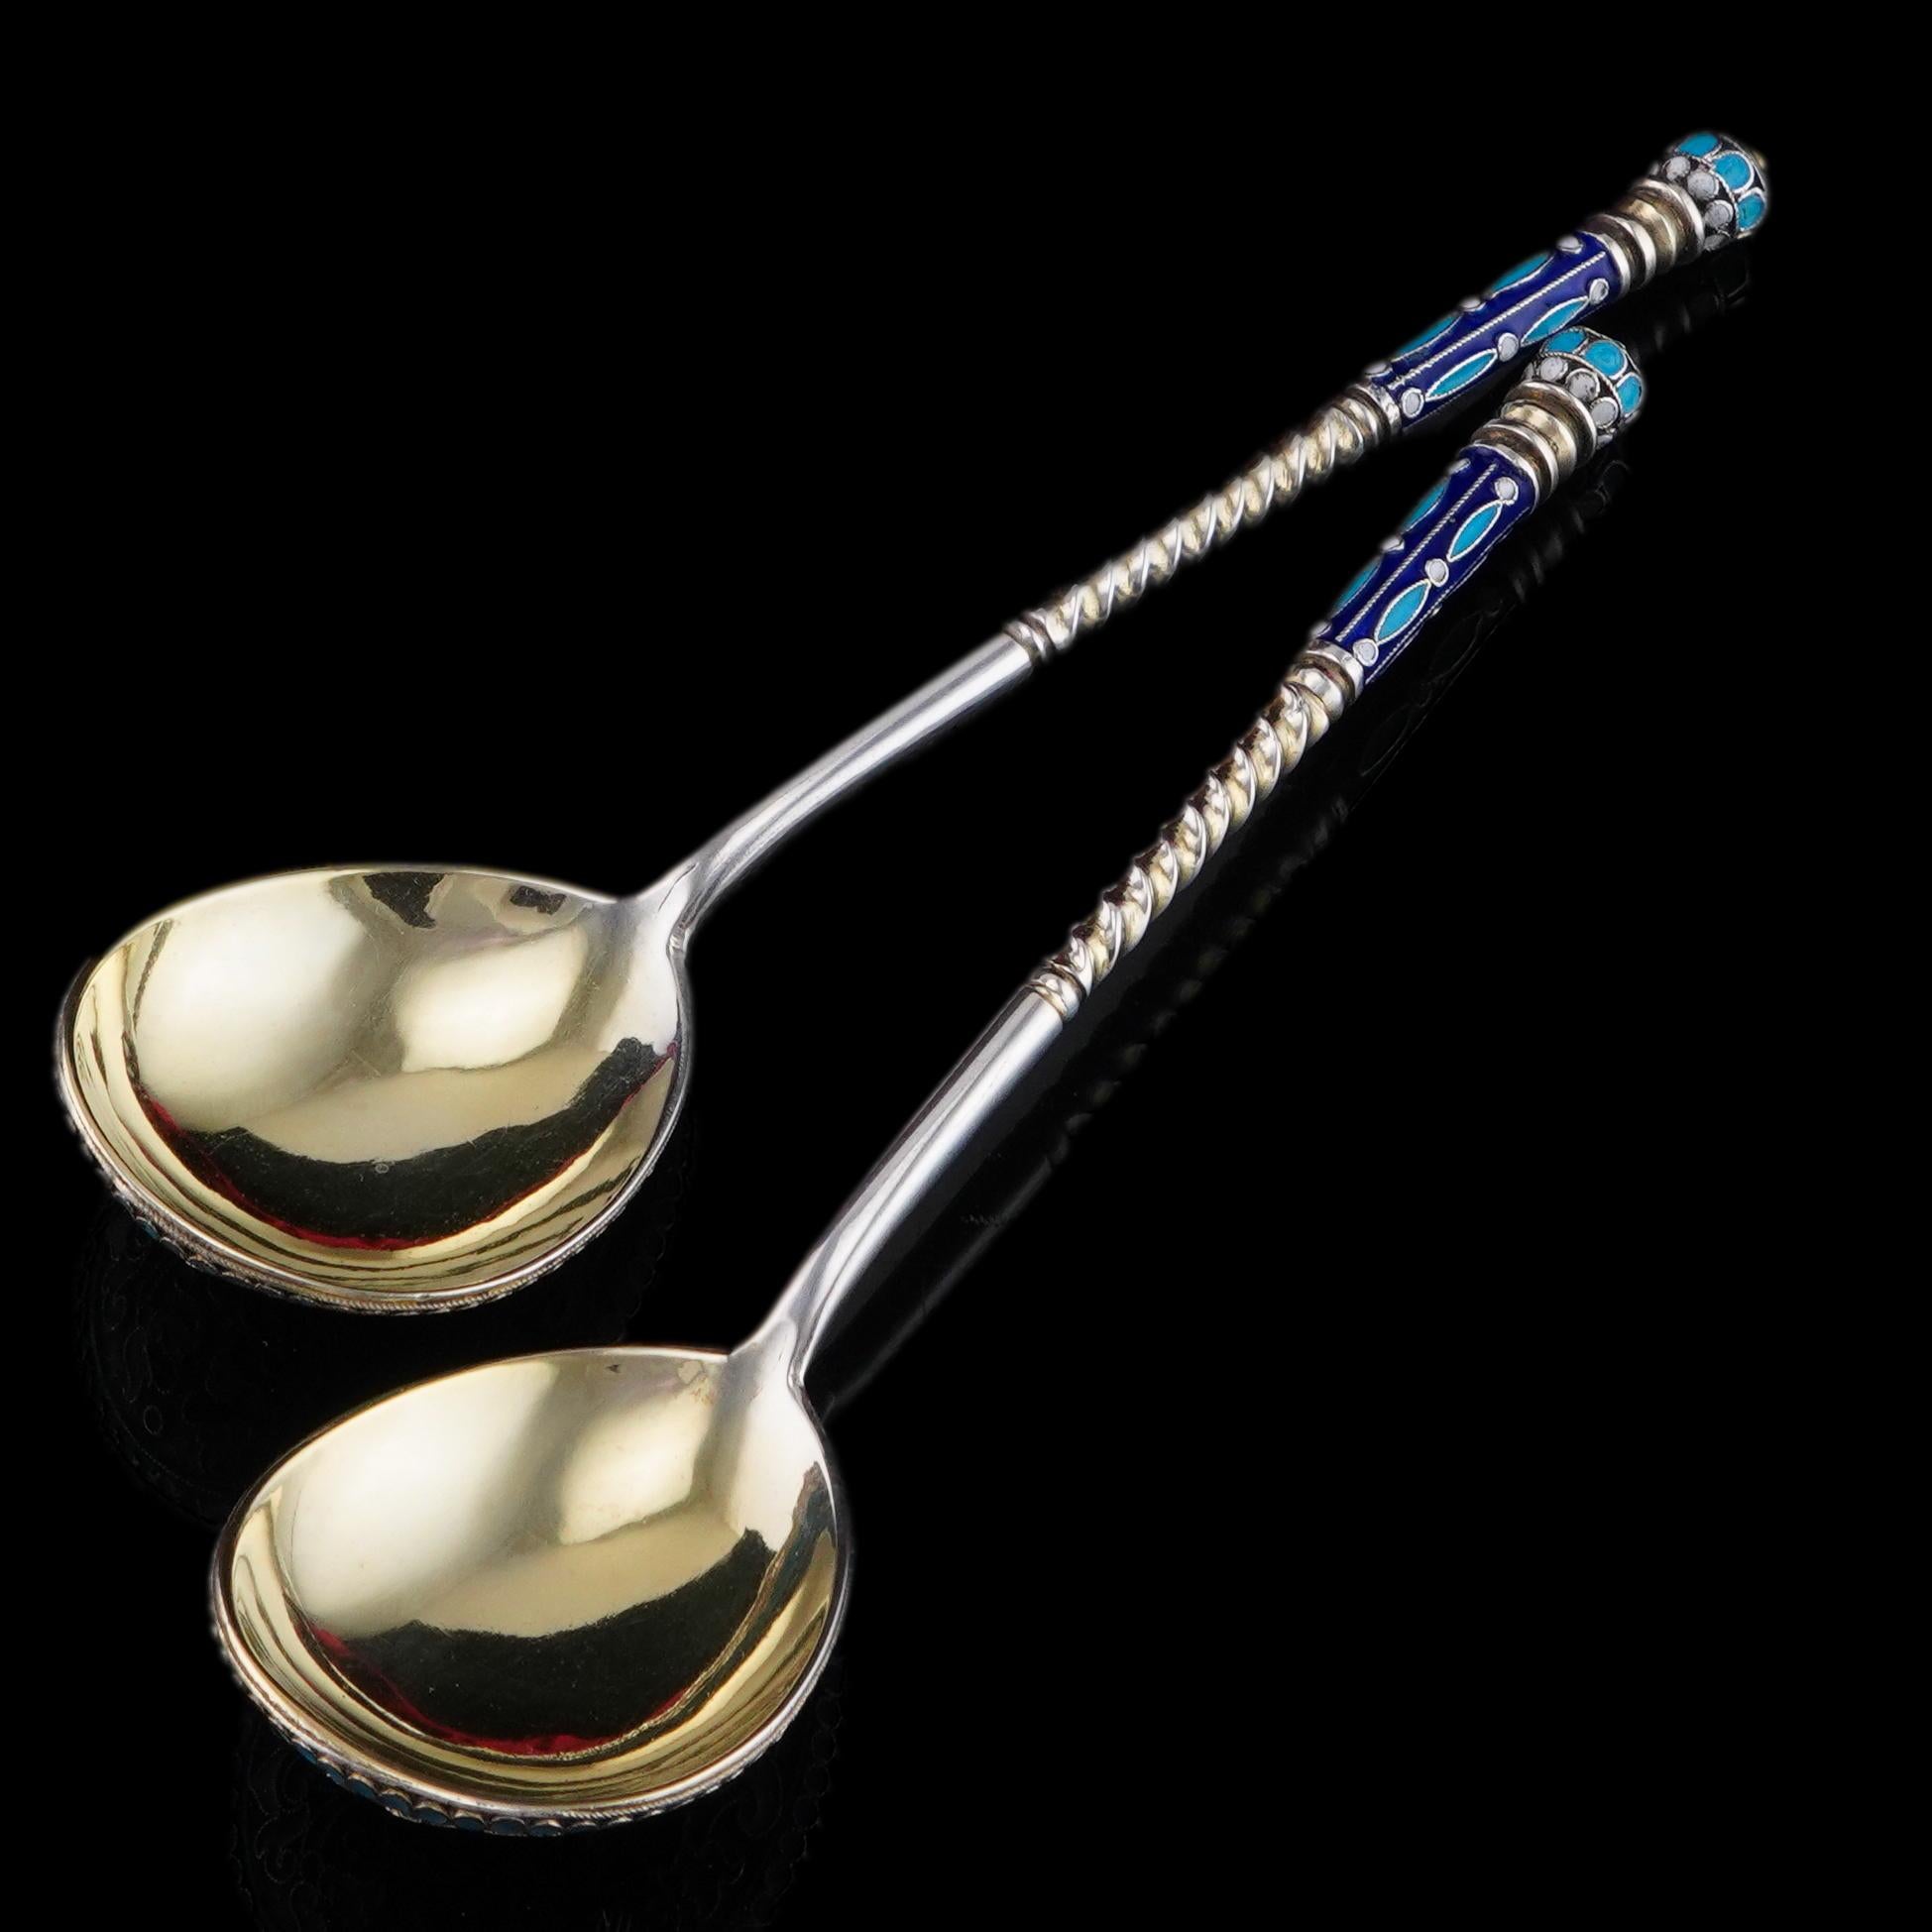 Antique Imperial Russian Solid Silver Spoons with Cloisonne Enamel c.1882 For Sale 14